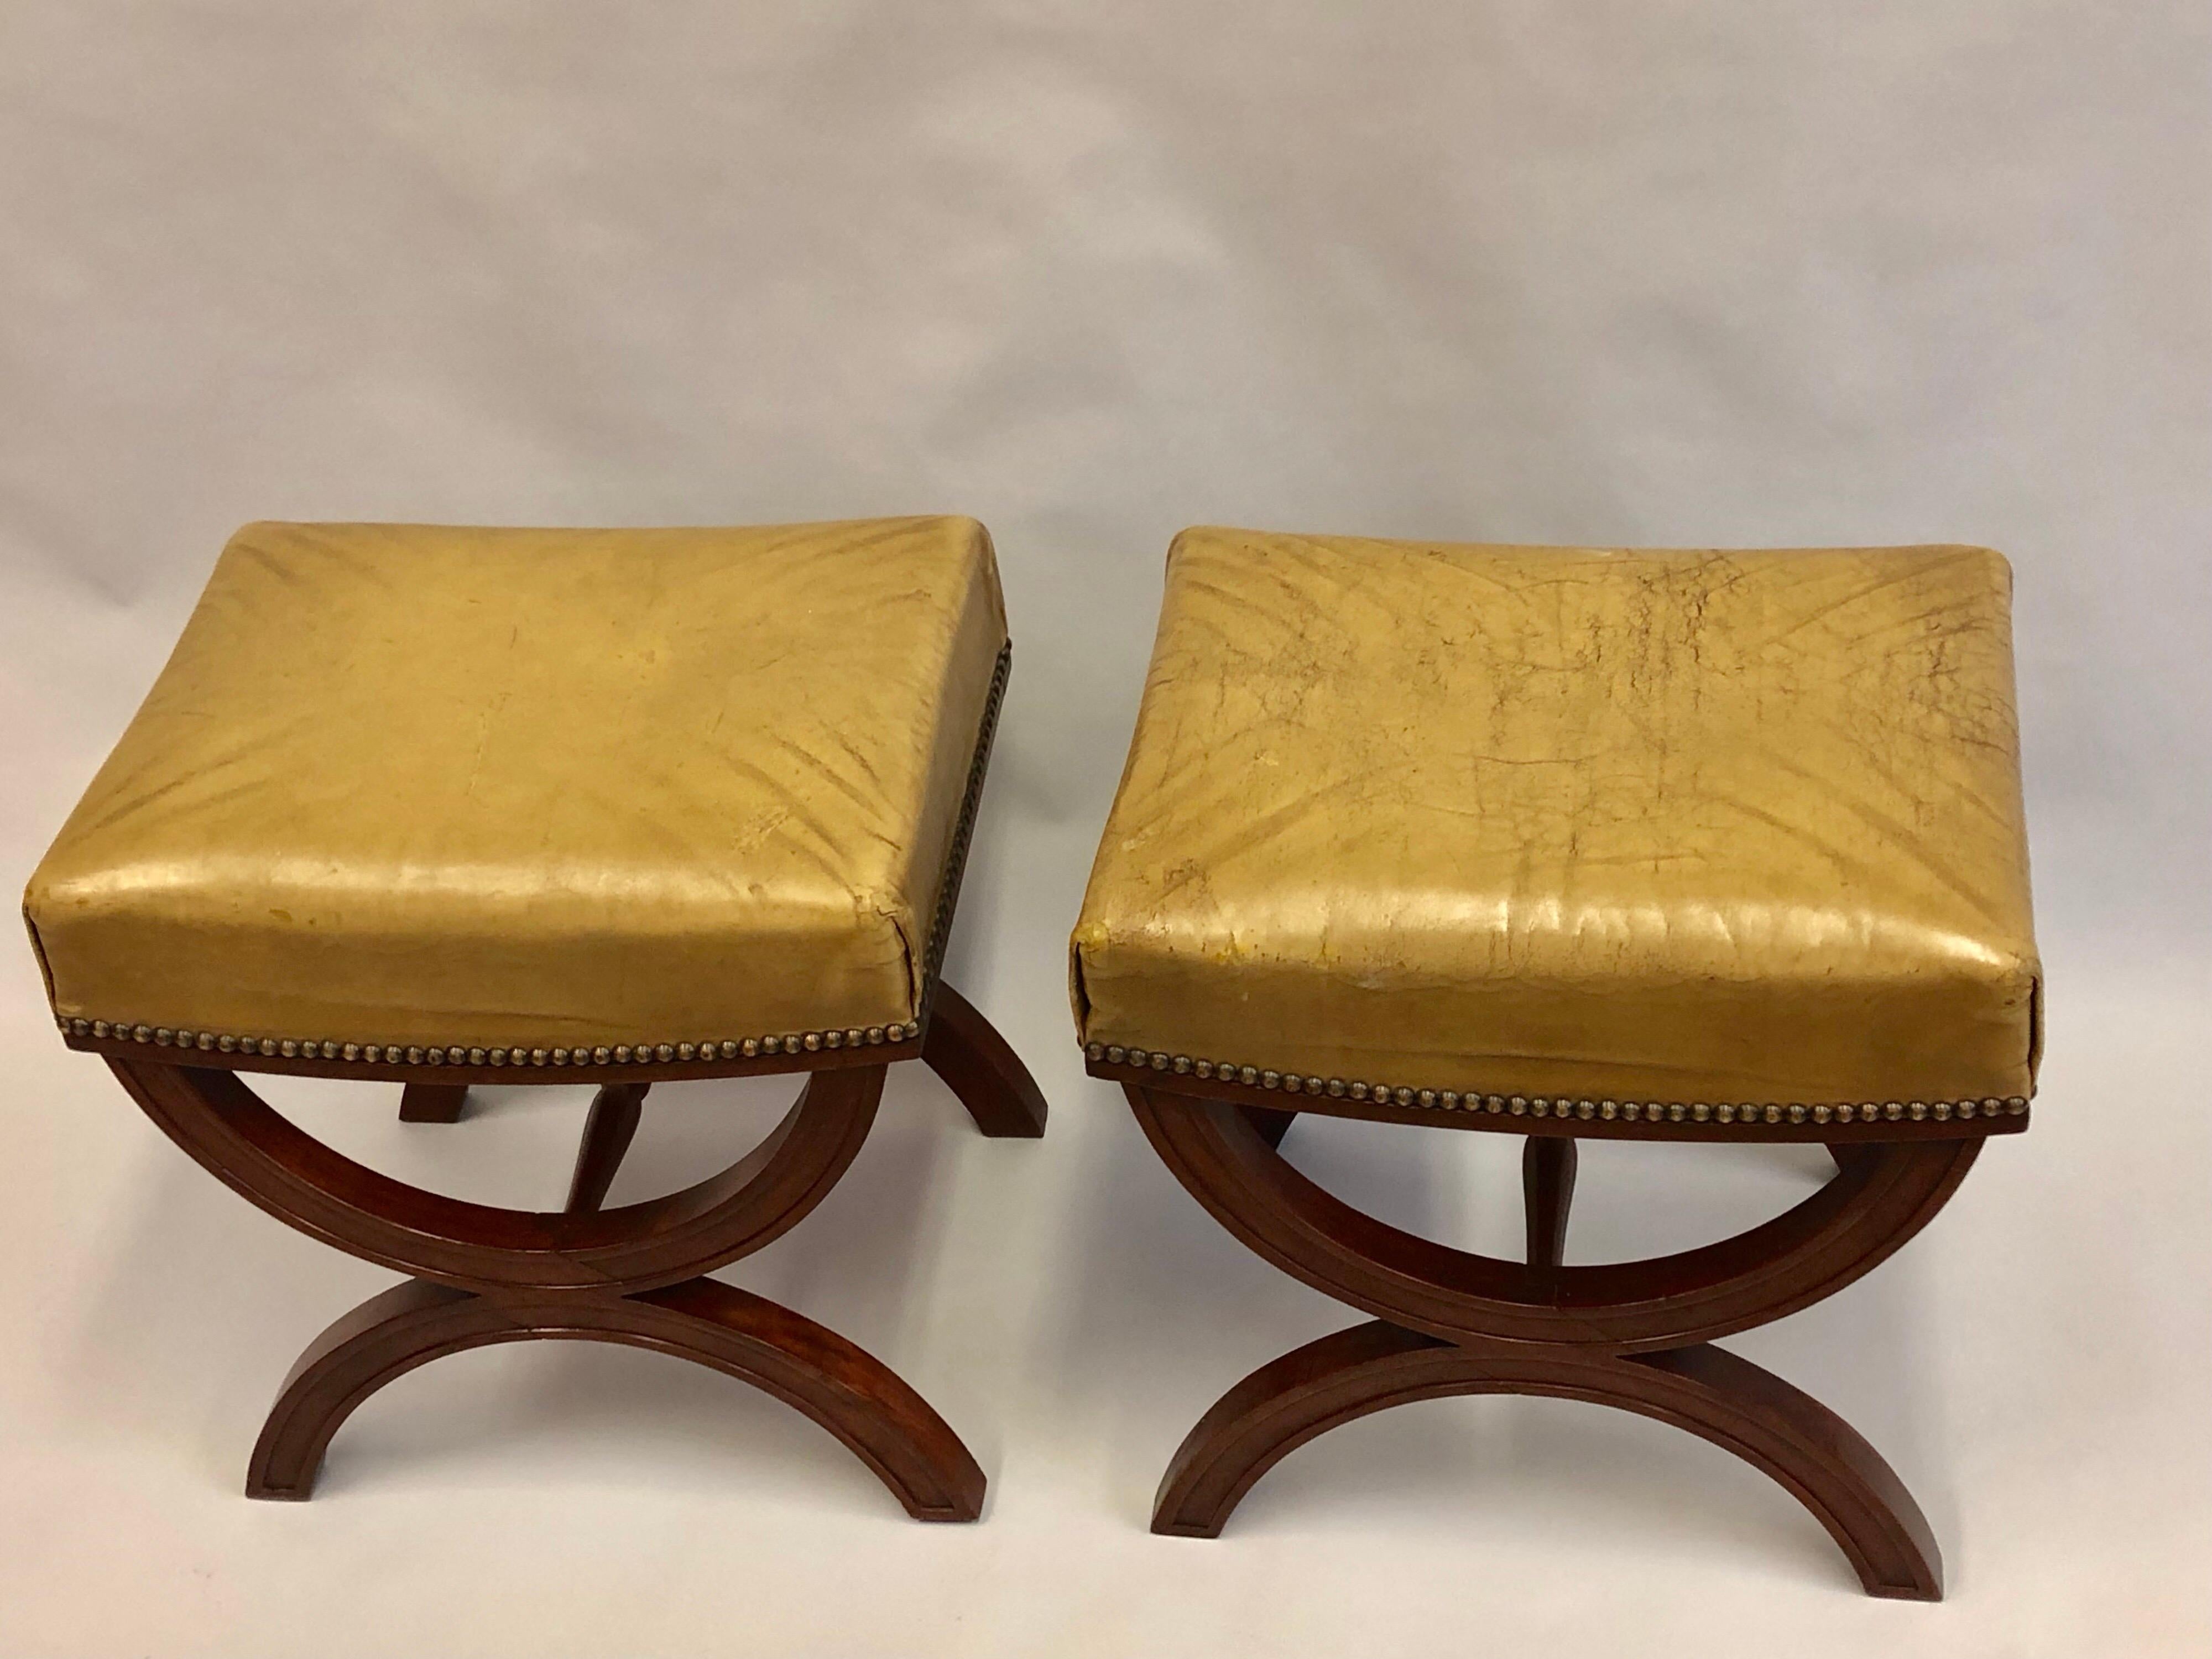 French Modern Neoclassical Mahogany & Leather Benches/ Stools, Andre Arbus, Pair In Good Condition For Sale In New York, NY